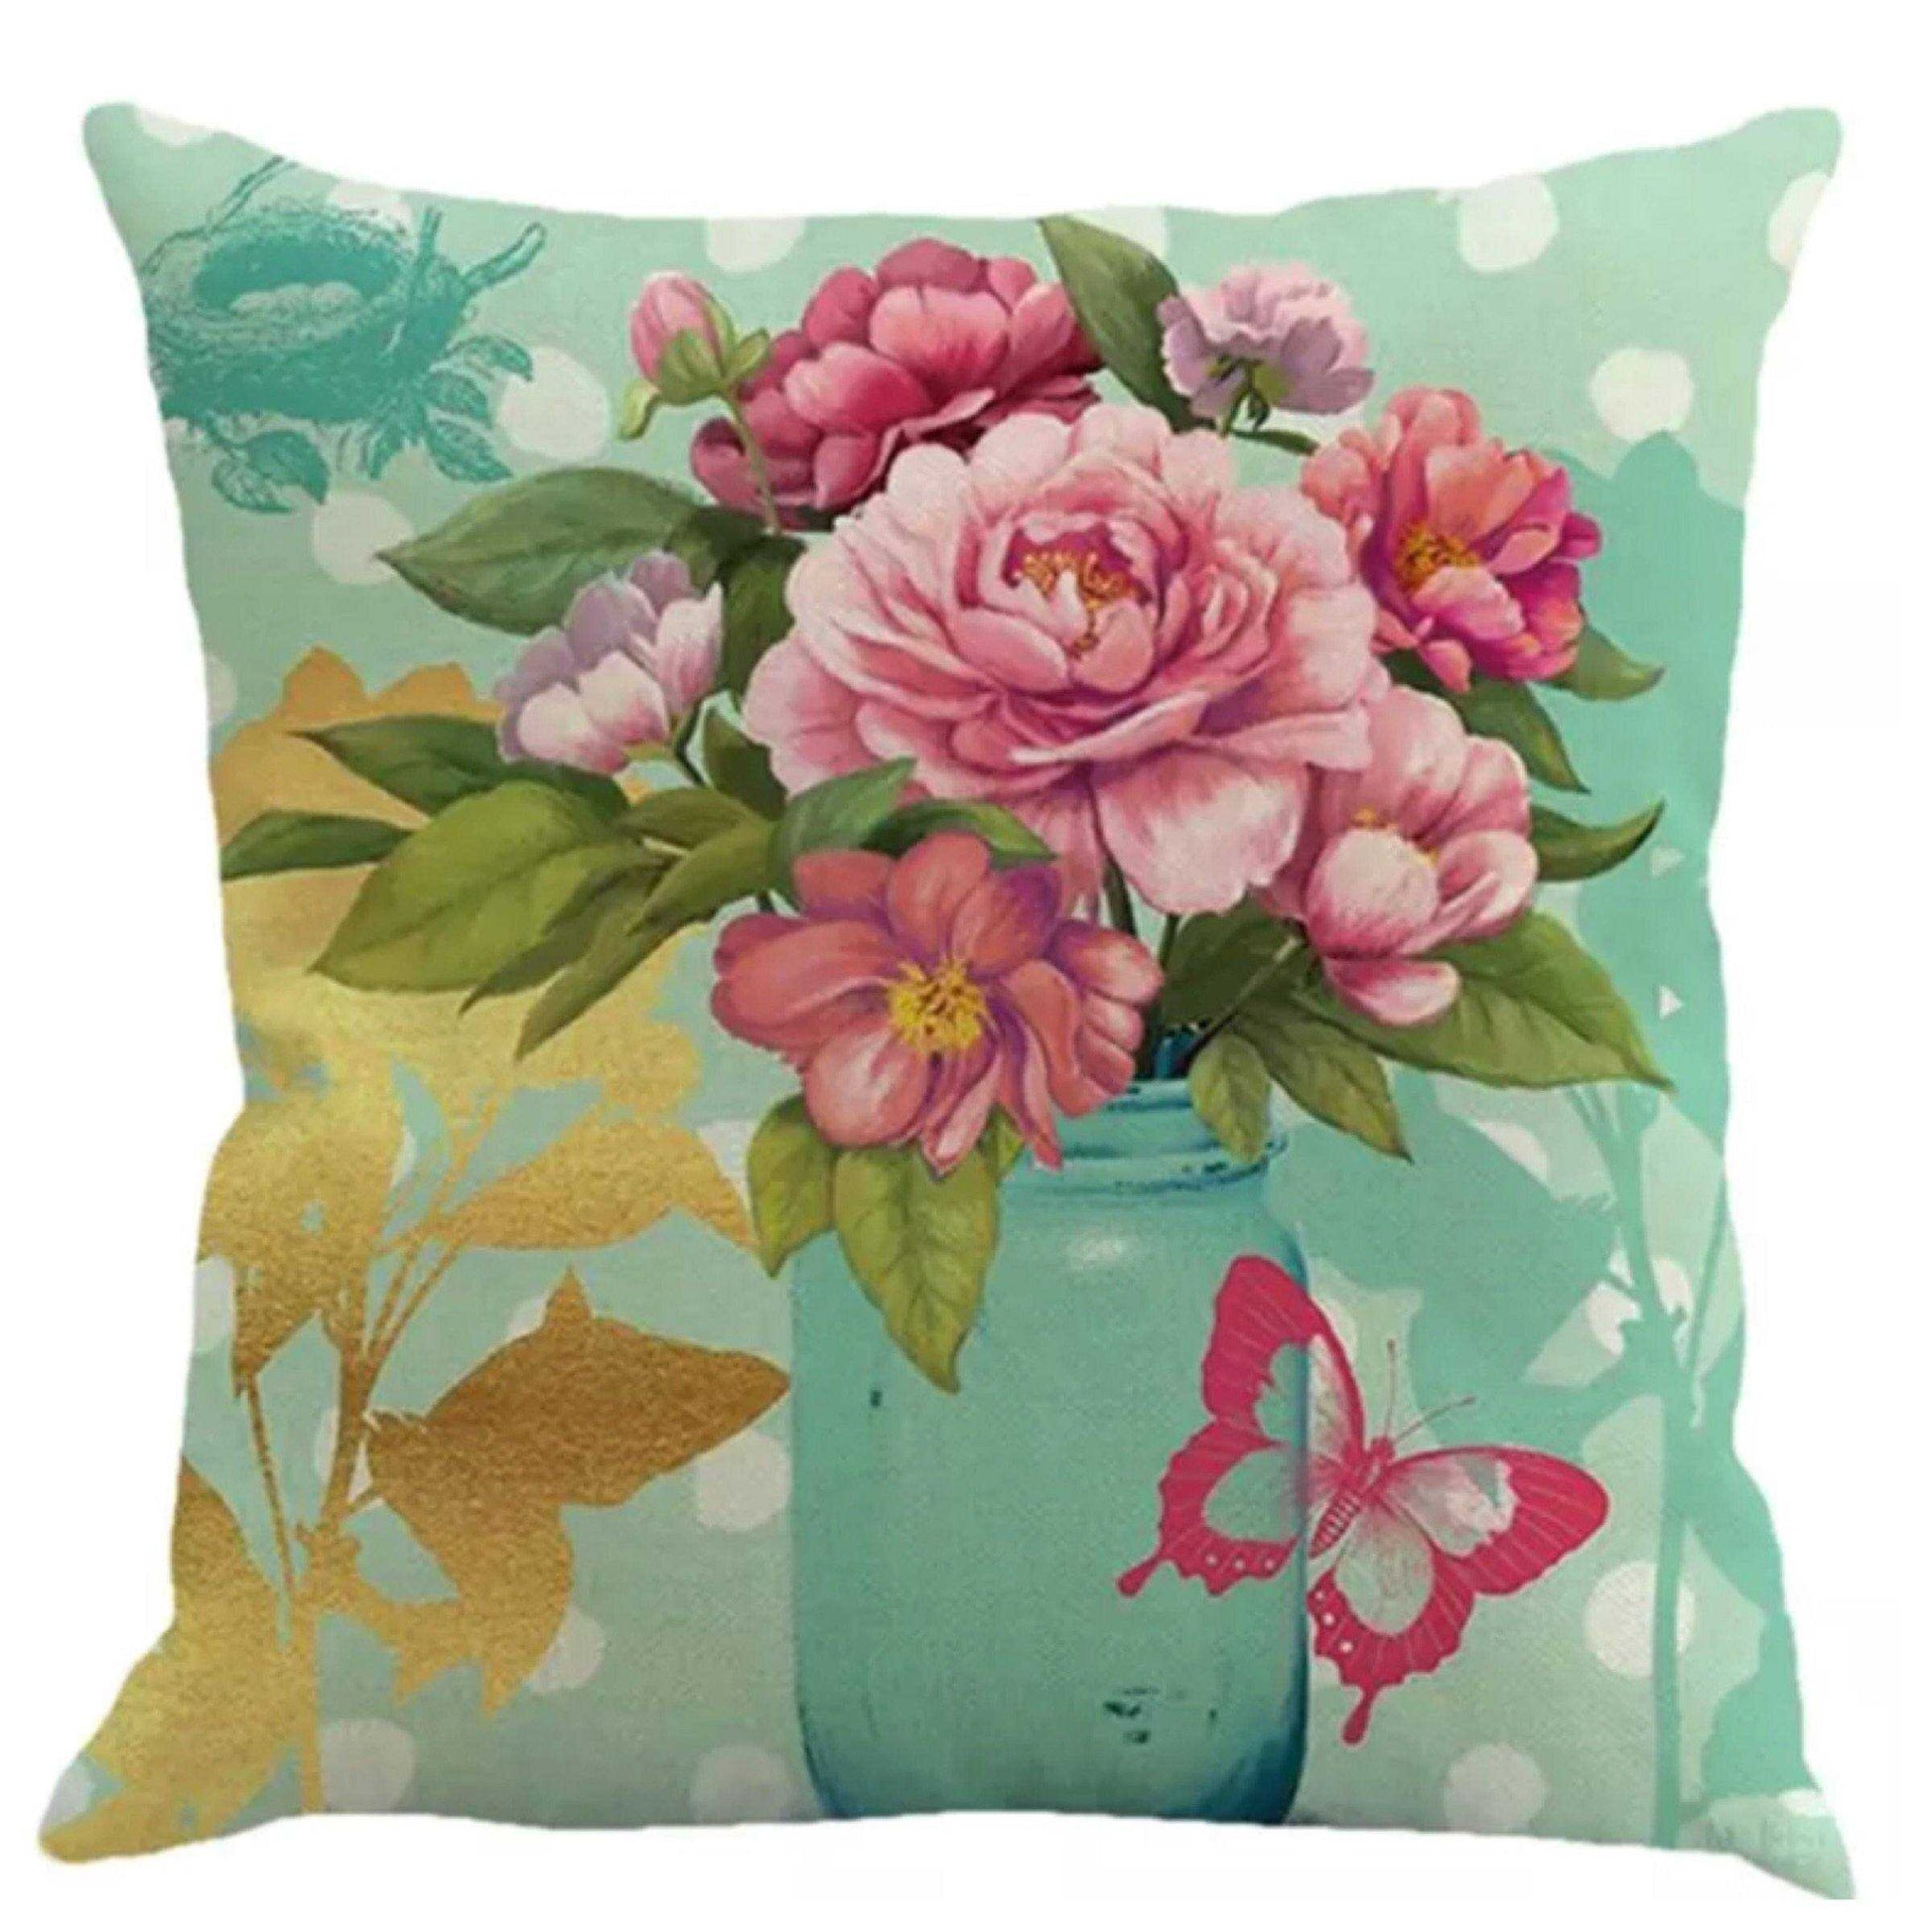 Cushion Pillow Pink & Green Flowers with Butterfly